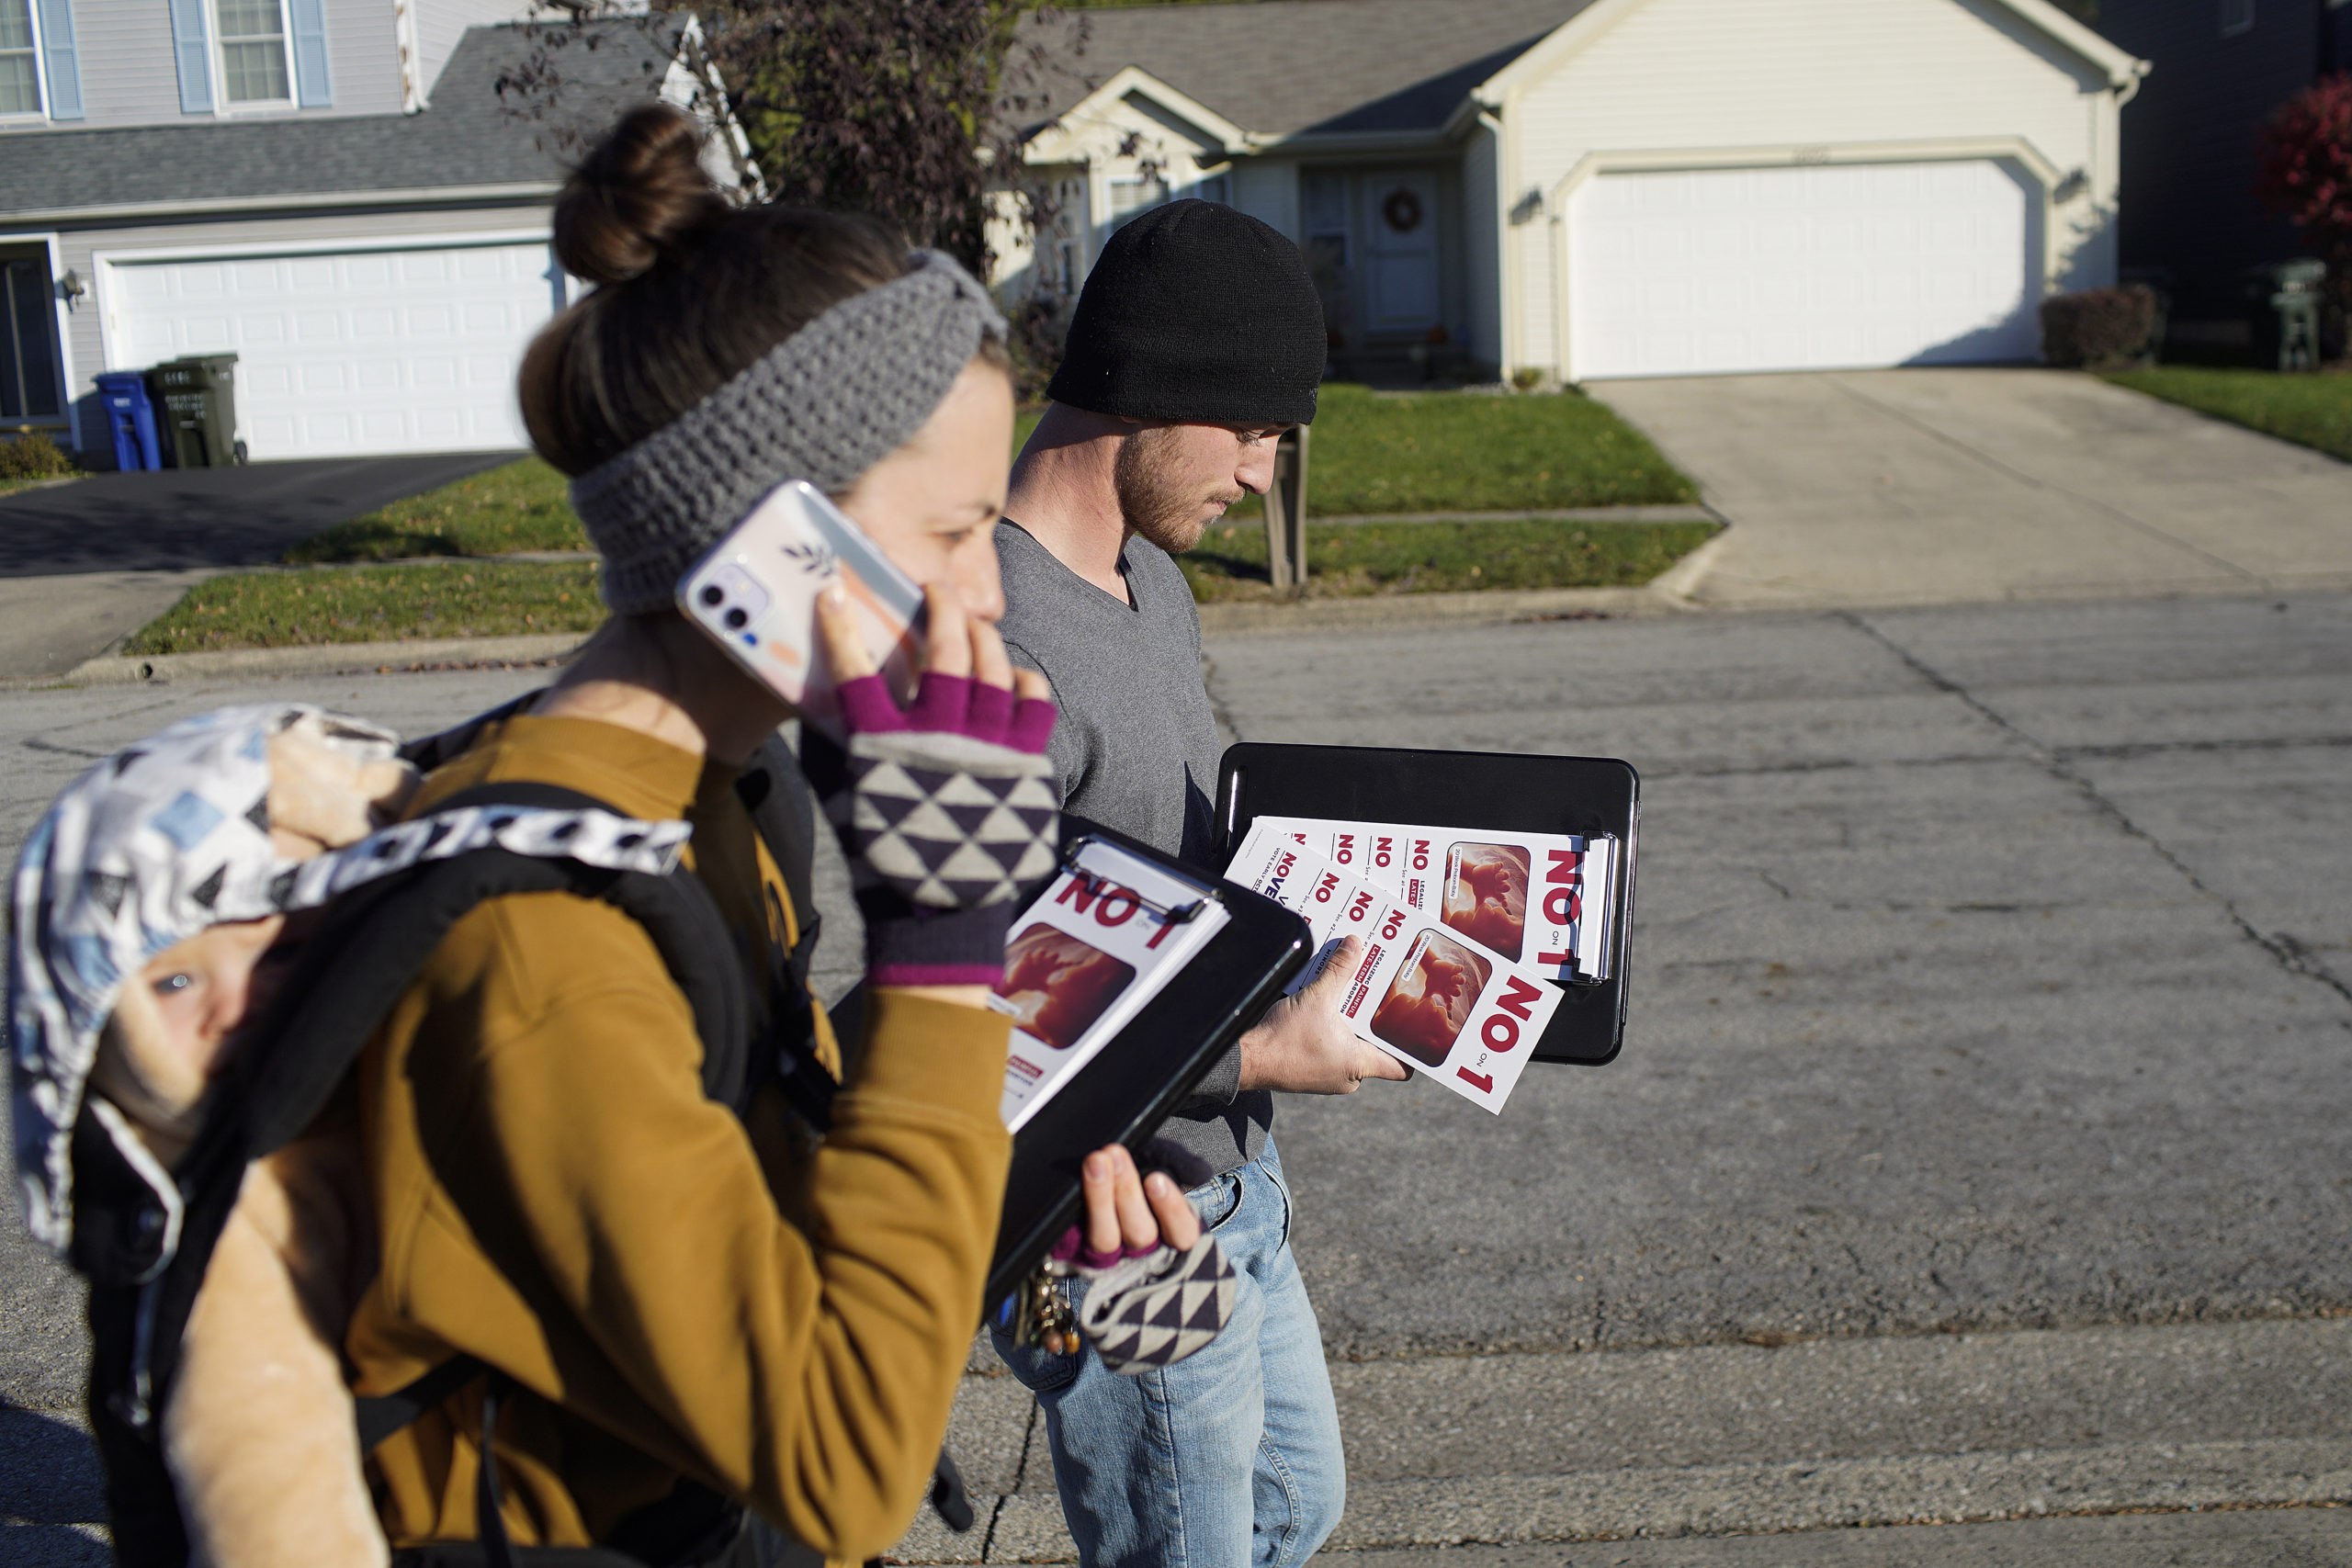 COLUMBUS, OHIO - NOVEMBER 3: Titus Meyer (R), and Elizabeth McCulfor (L), employees of anti-abortion organization Created Equal, walk with daughter Willow on November 3, 2023 in Canal Winchester, Ohio. Ohioans will vote on Issue 1, officially titled “The Right to Reproductive Freedom with Protections for Health and Safety,” which would codify reproductive rights in the Ohio Constitution, including contraception, fertility treatment and the right to abortion up to the point of fetal viability while permitting restrictions after. (Photo by Andrew Spear/Getty Images)